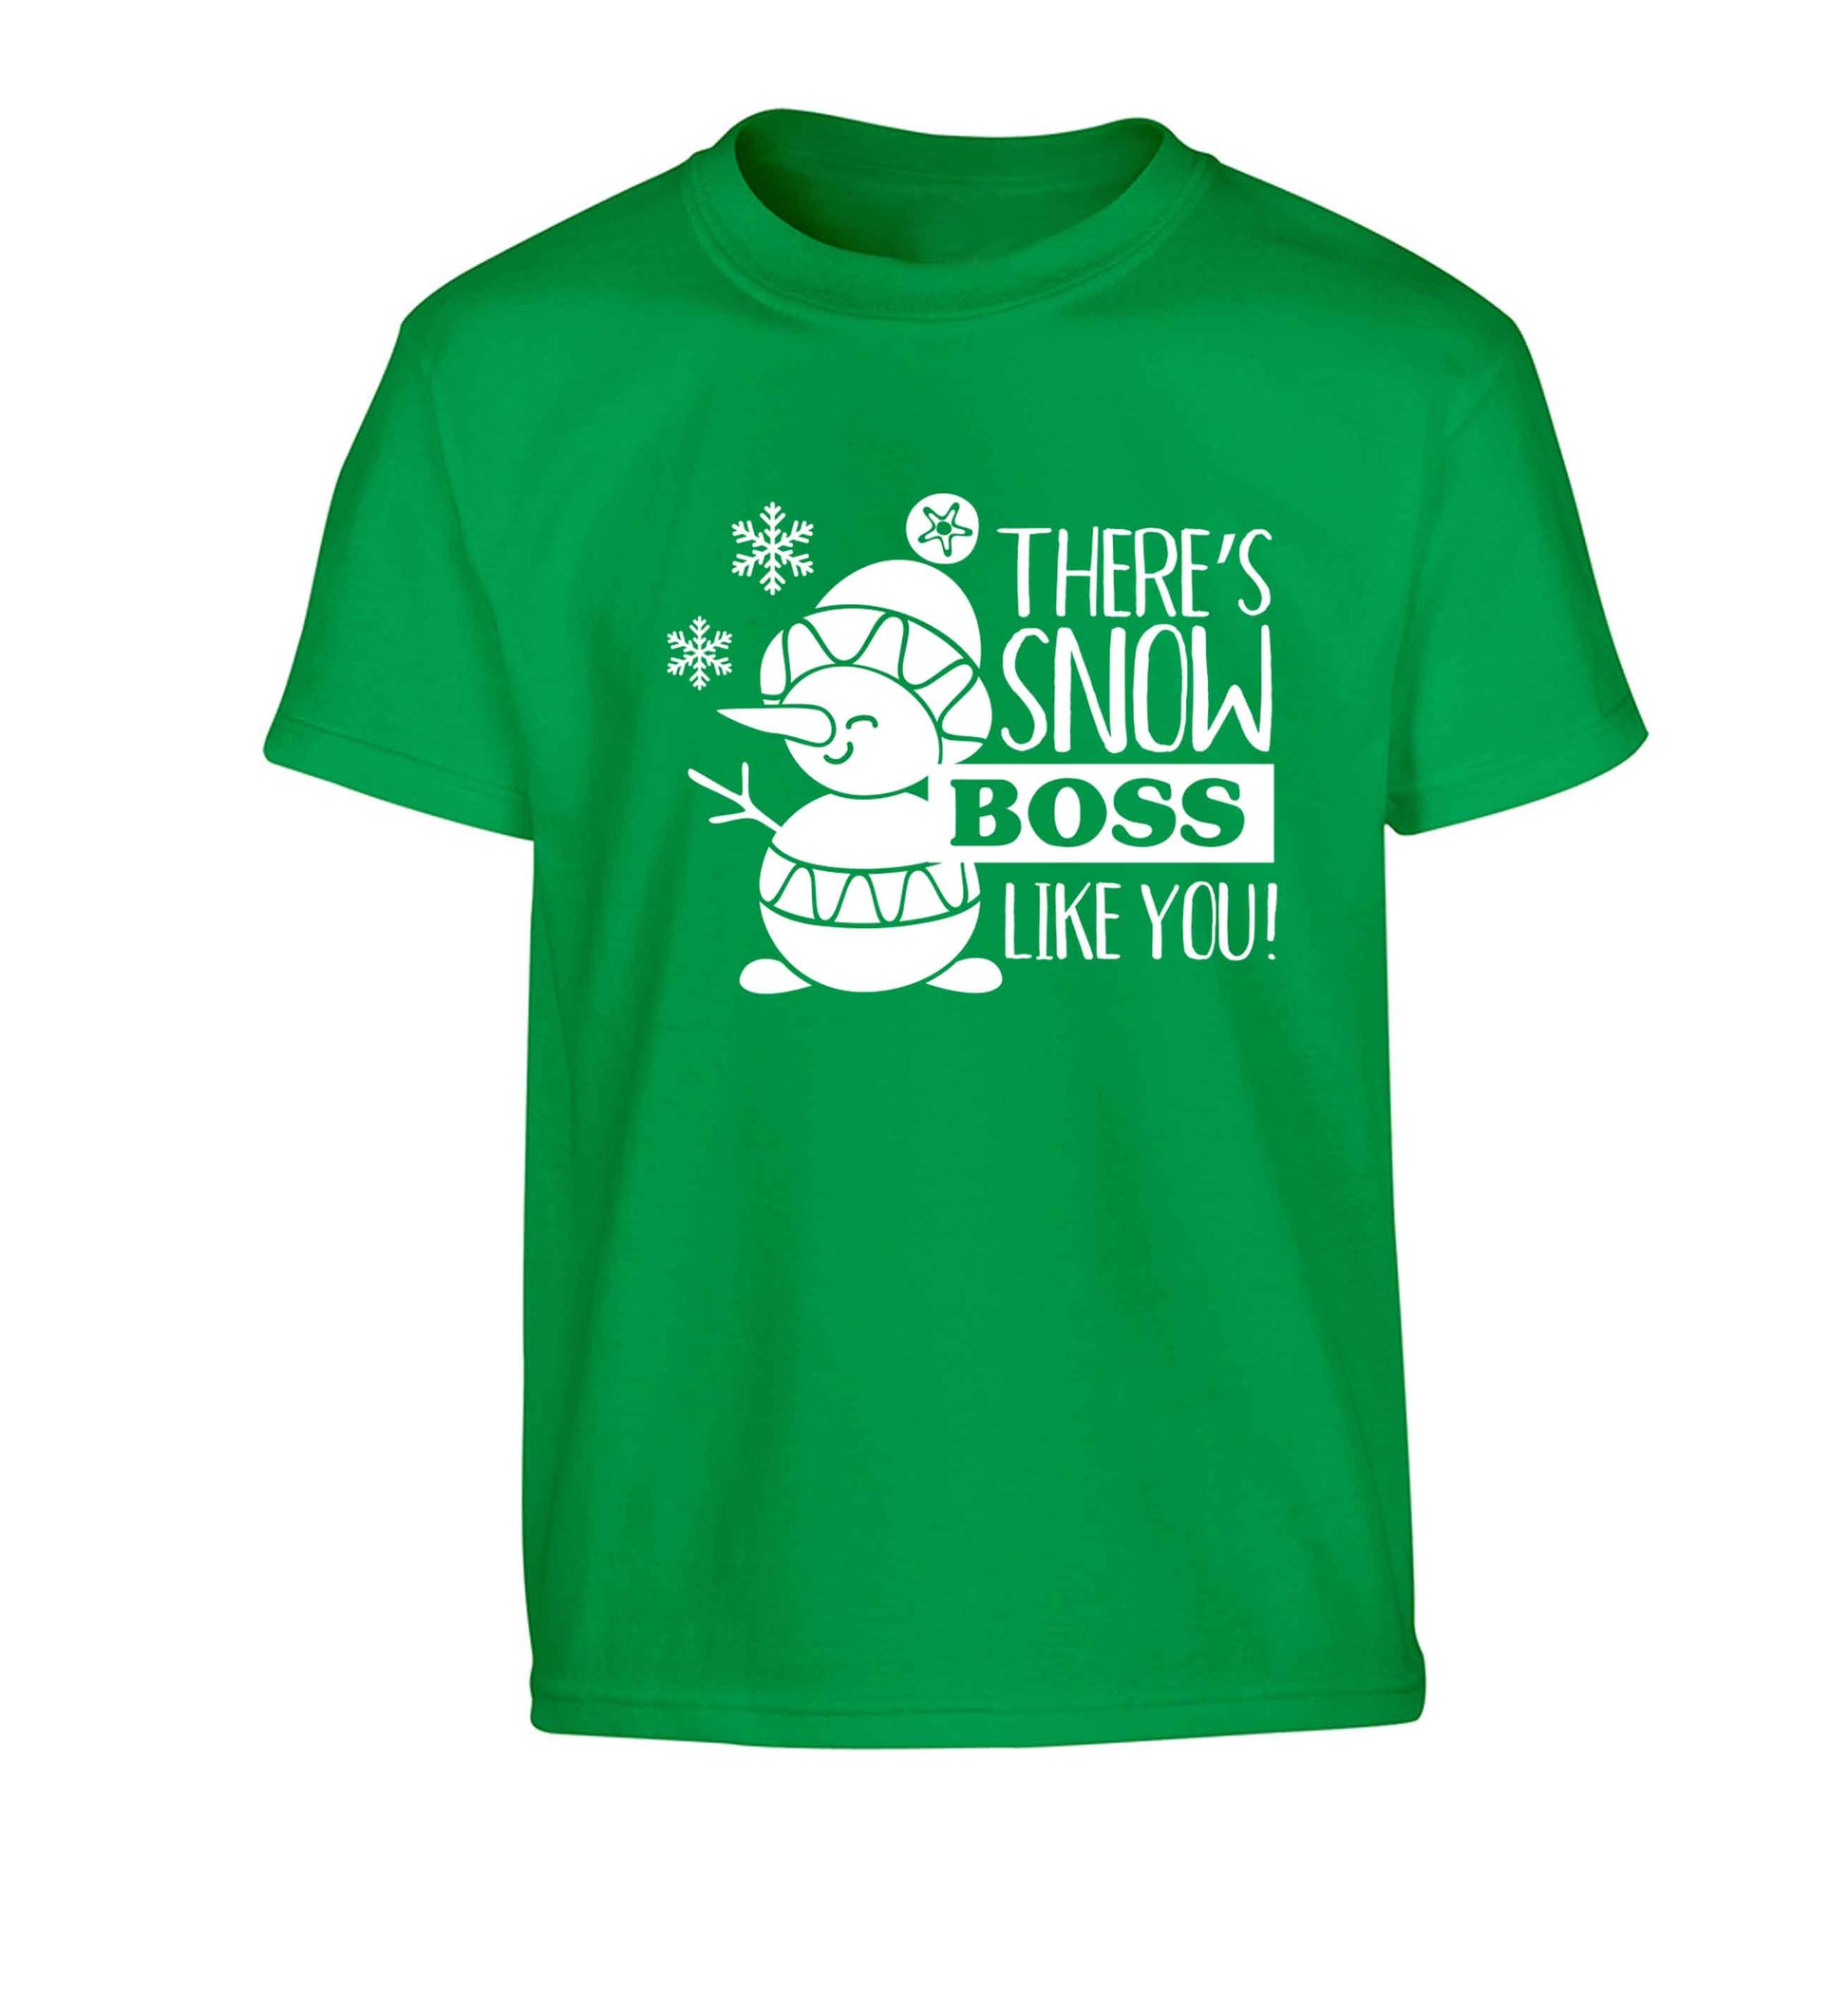 There's snow boss like you Children's green Tshirt 12-13 Years